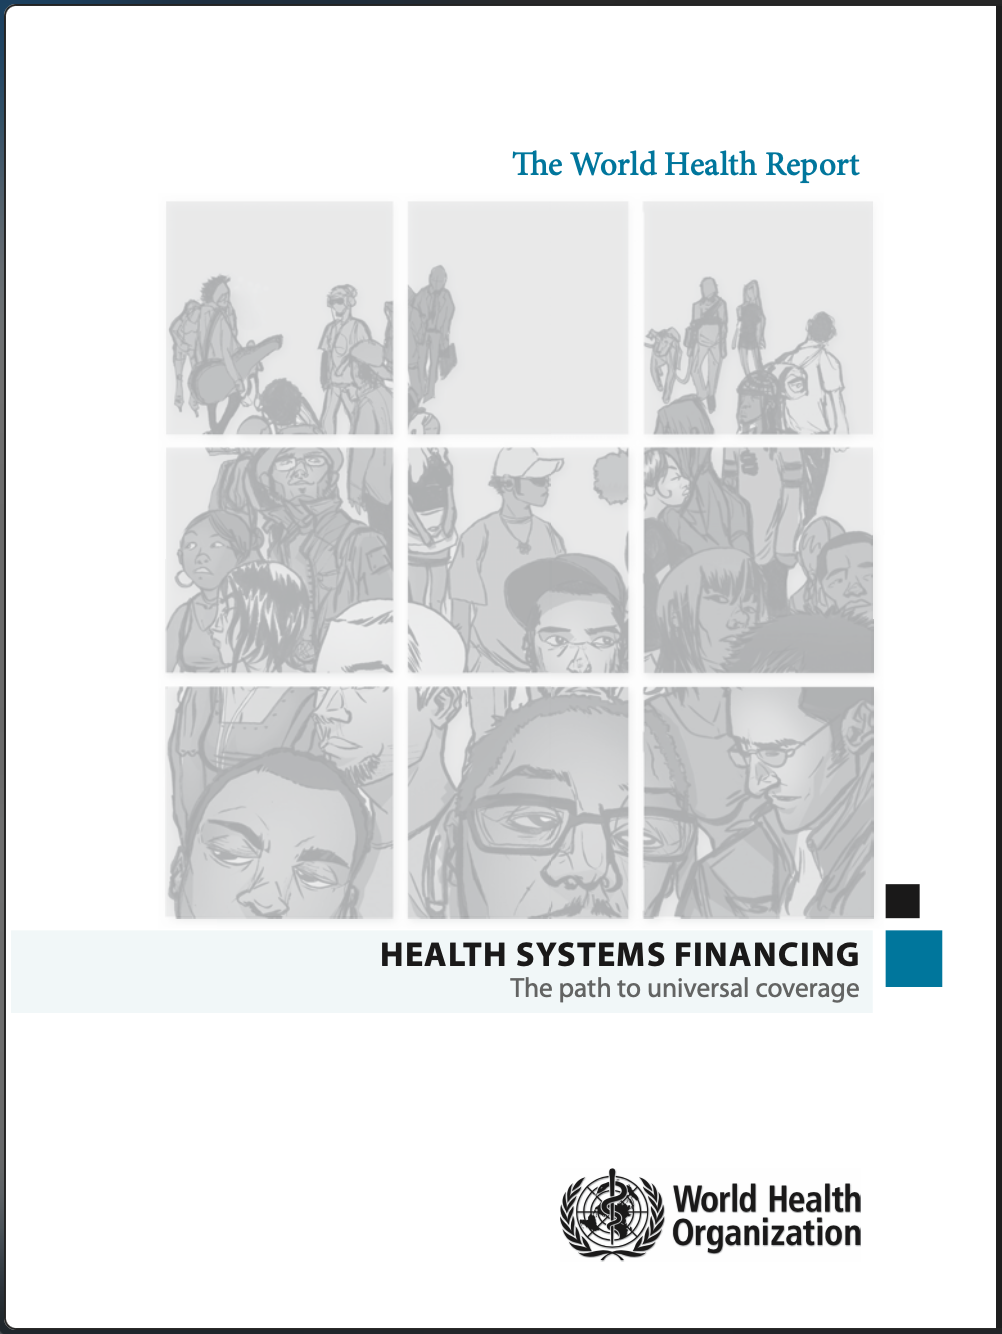 Health Systems Financing: The Path to Universal Coverage (WHO 2010)